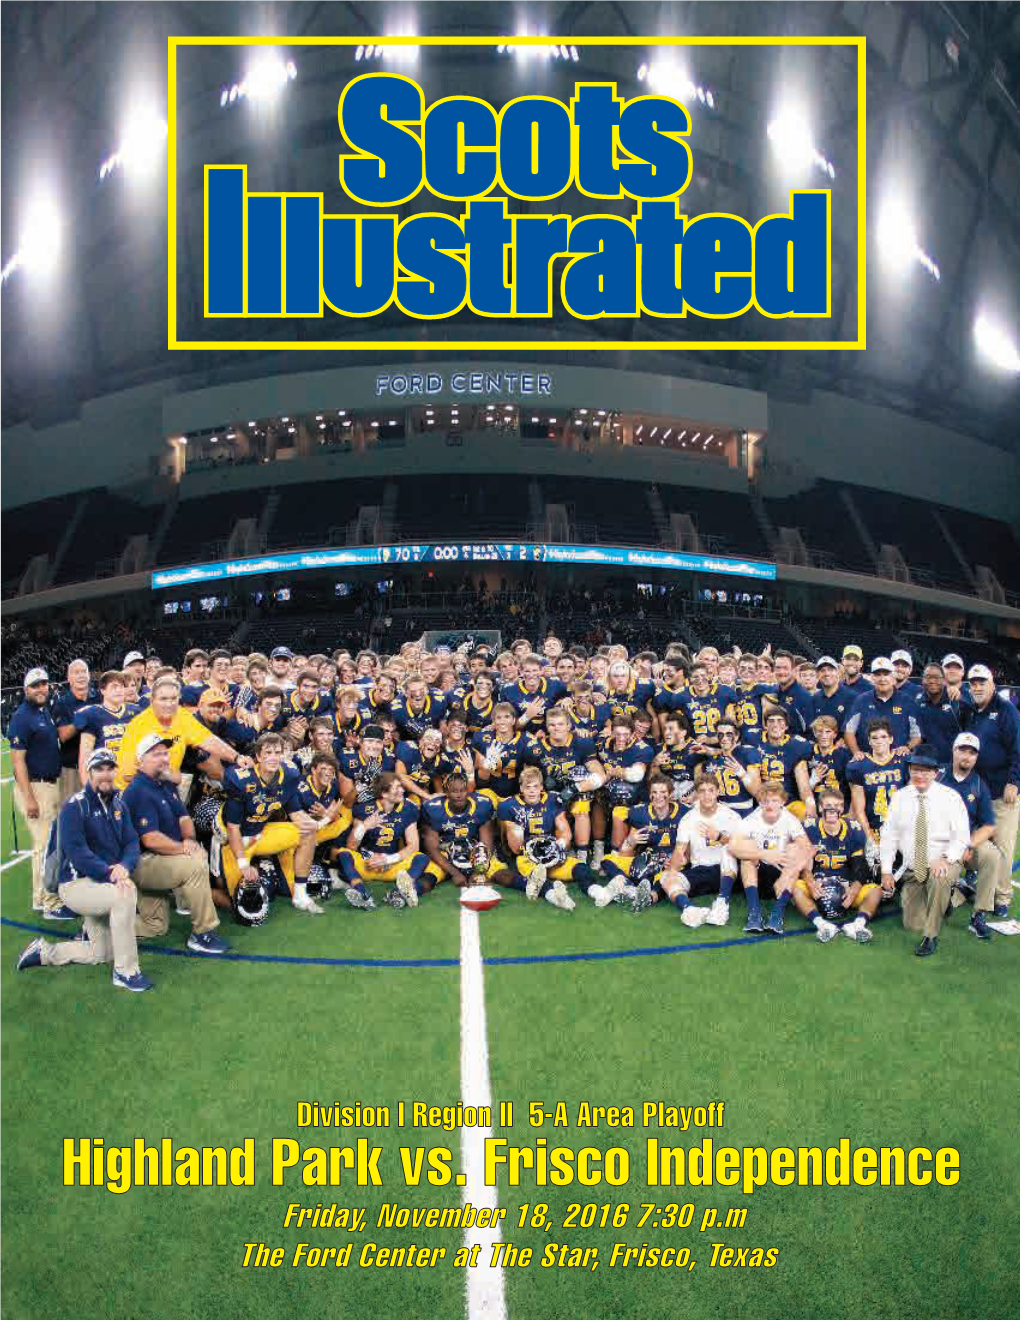 Highland Park Vs. Frisco Independence Friday, November 18, 2016 7:30 P.M the Ford Center at the Star, Frisco, Texas